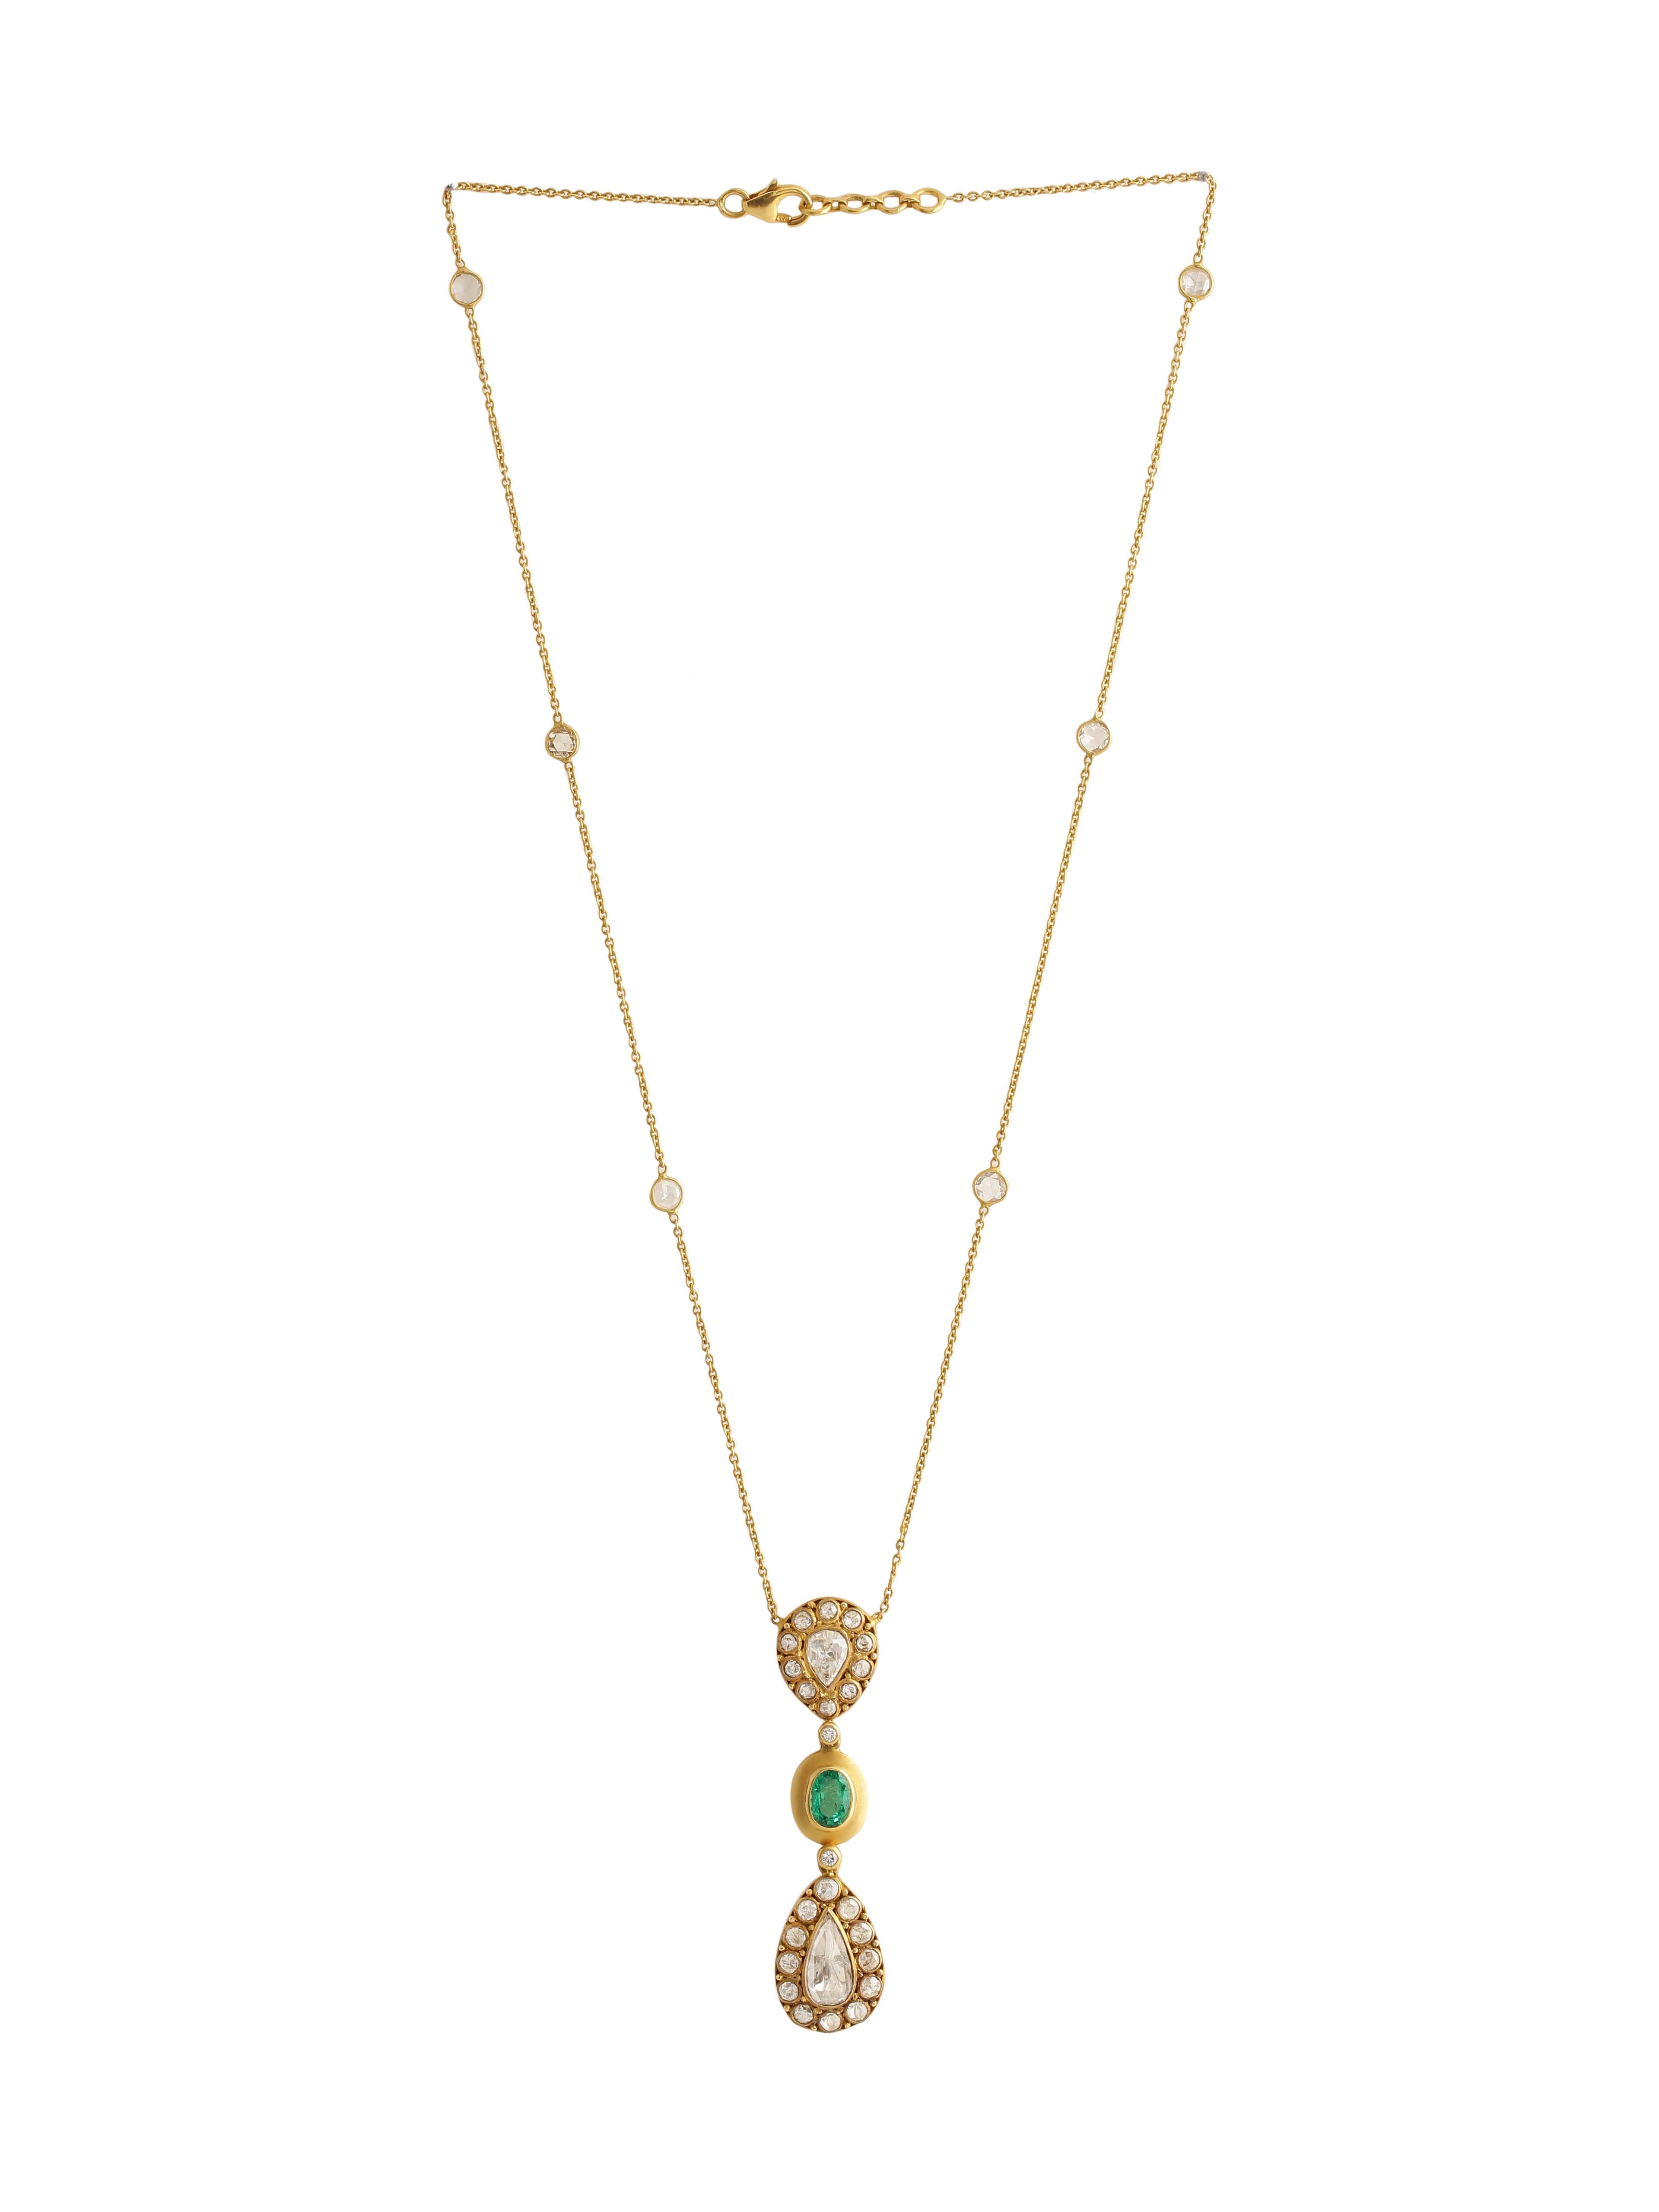 Art Deco Necklace with 2.28 Carats Diamonds and Emeralds Handcrafted in 18k Gold For Sale